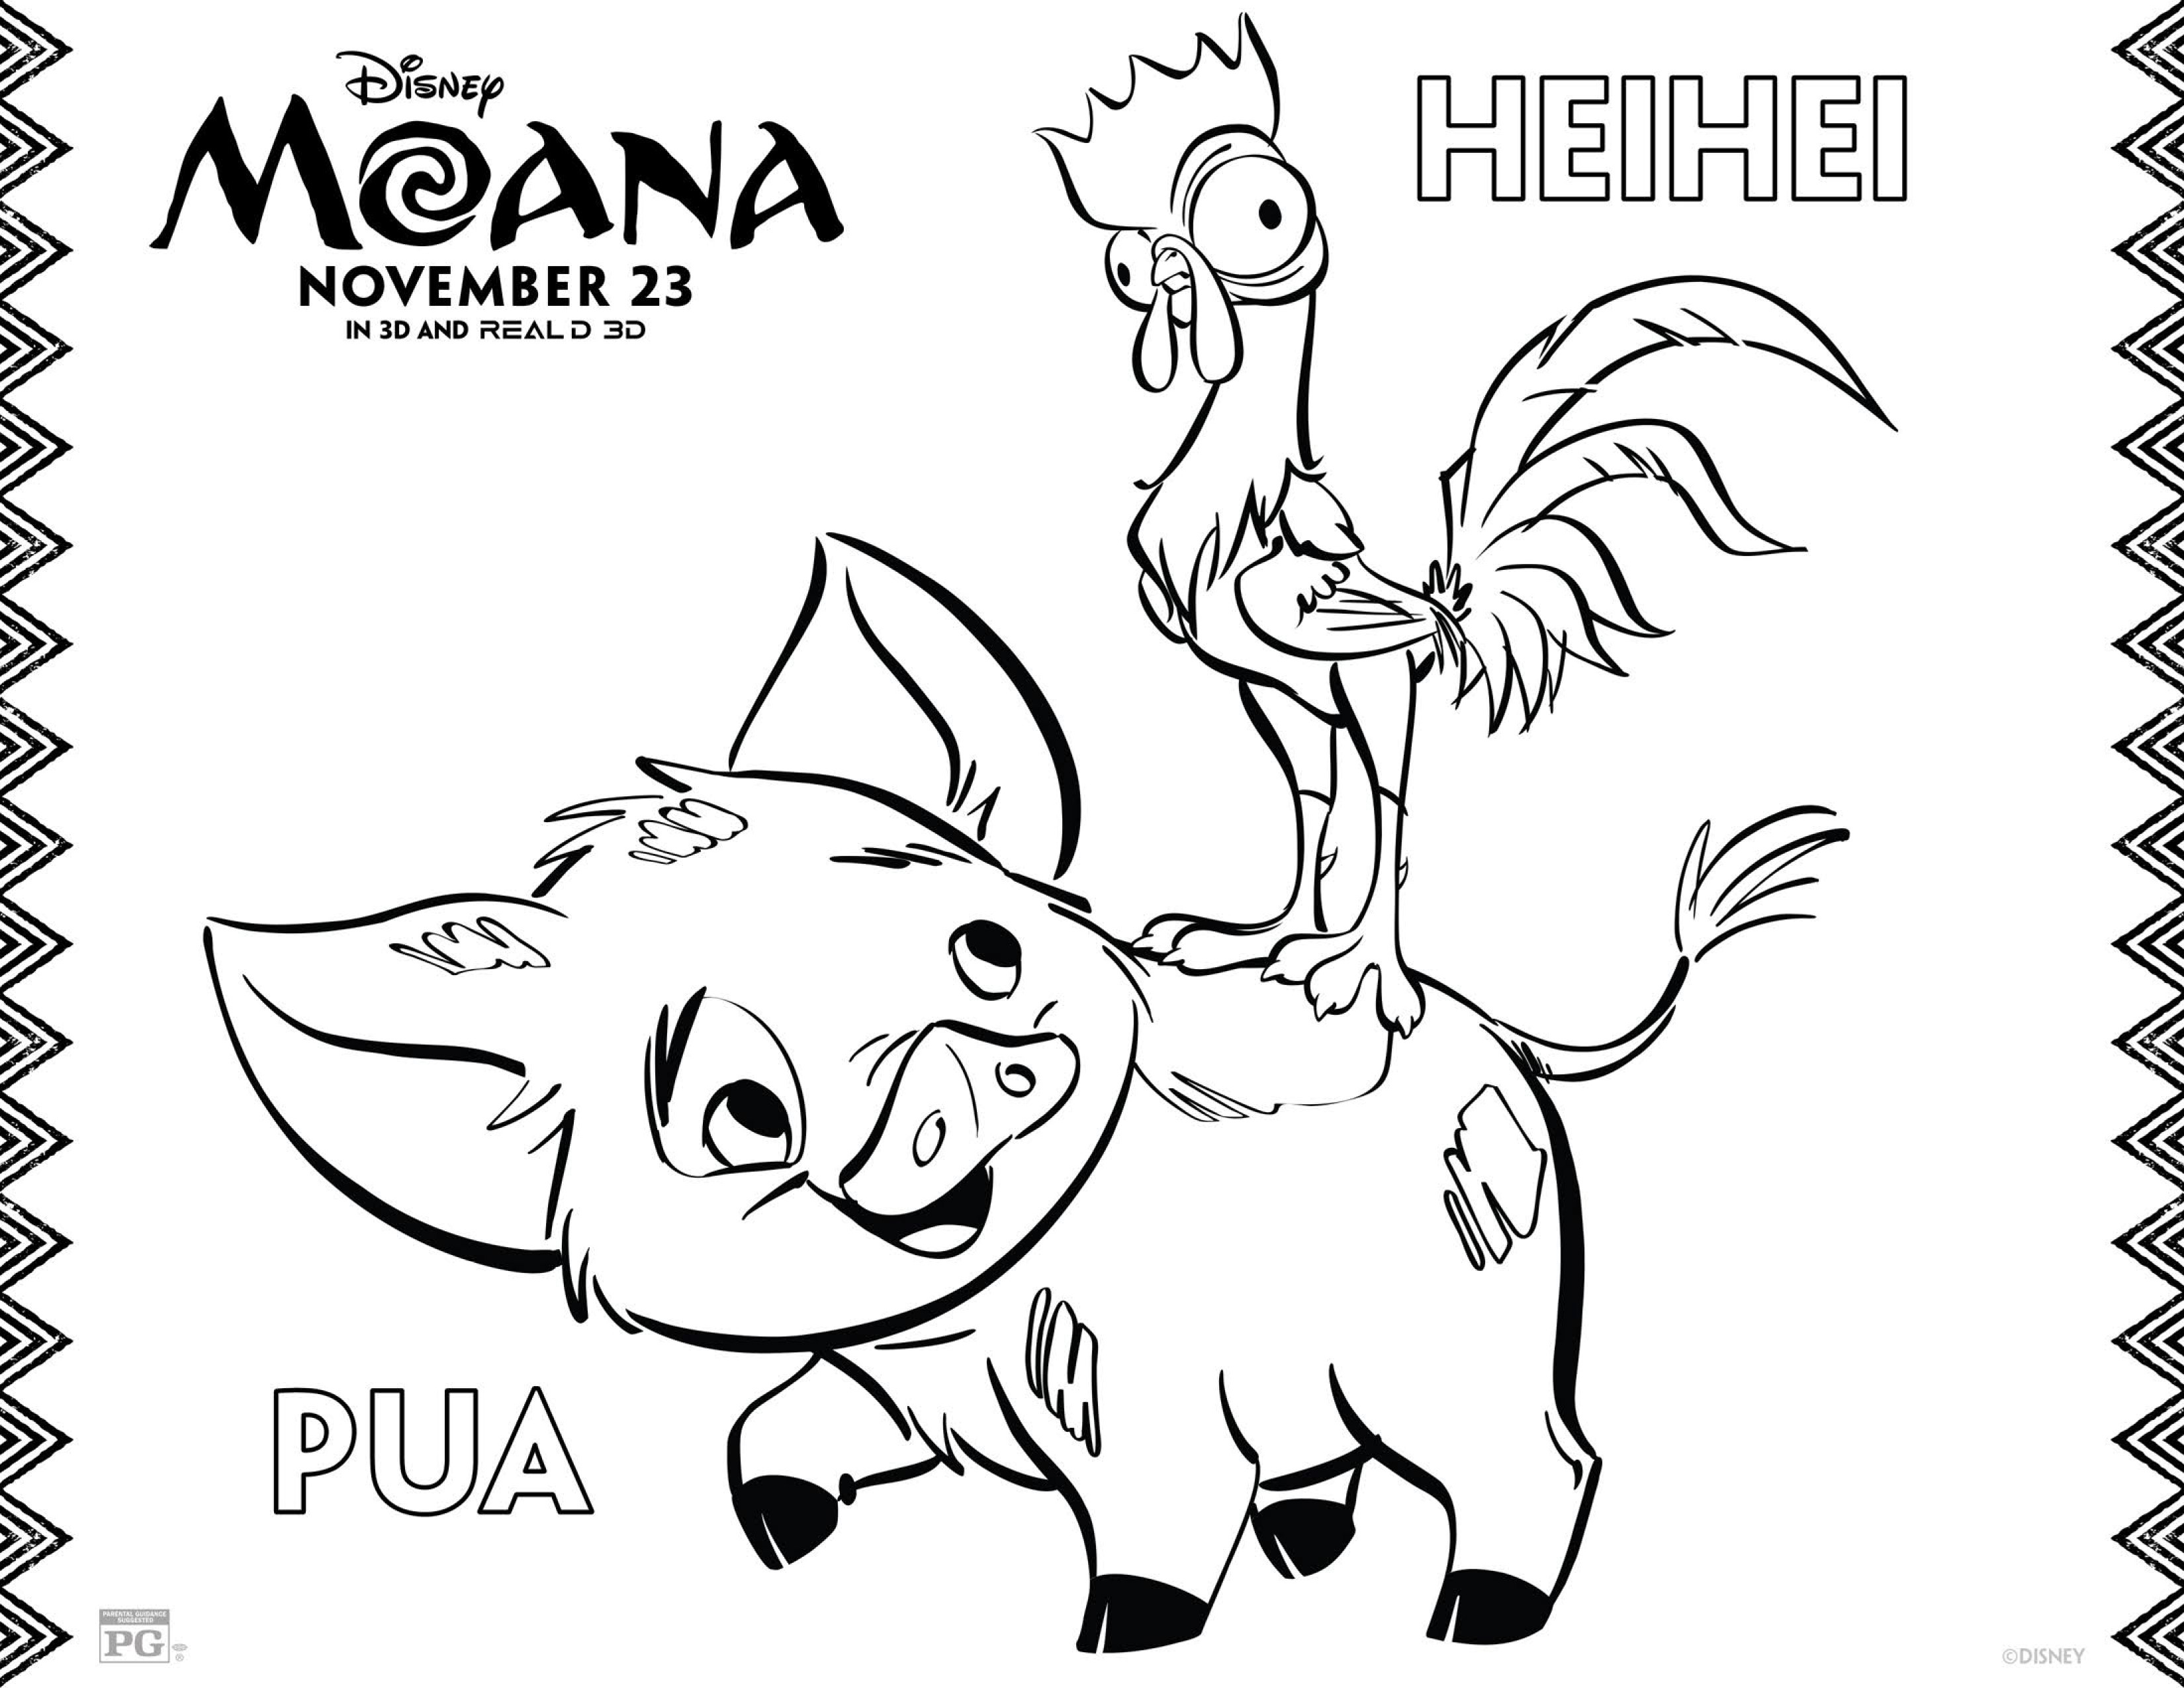 Moana Pua Coloring Pages
 Moana Coloring Pages Best Coloring Pages For Kids